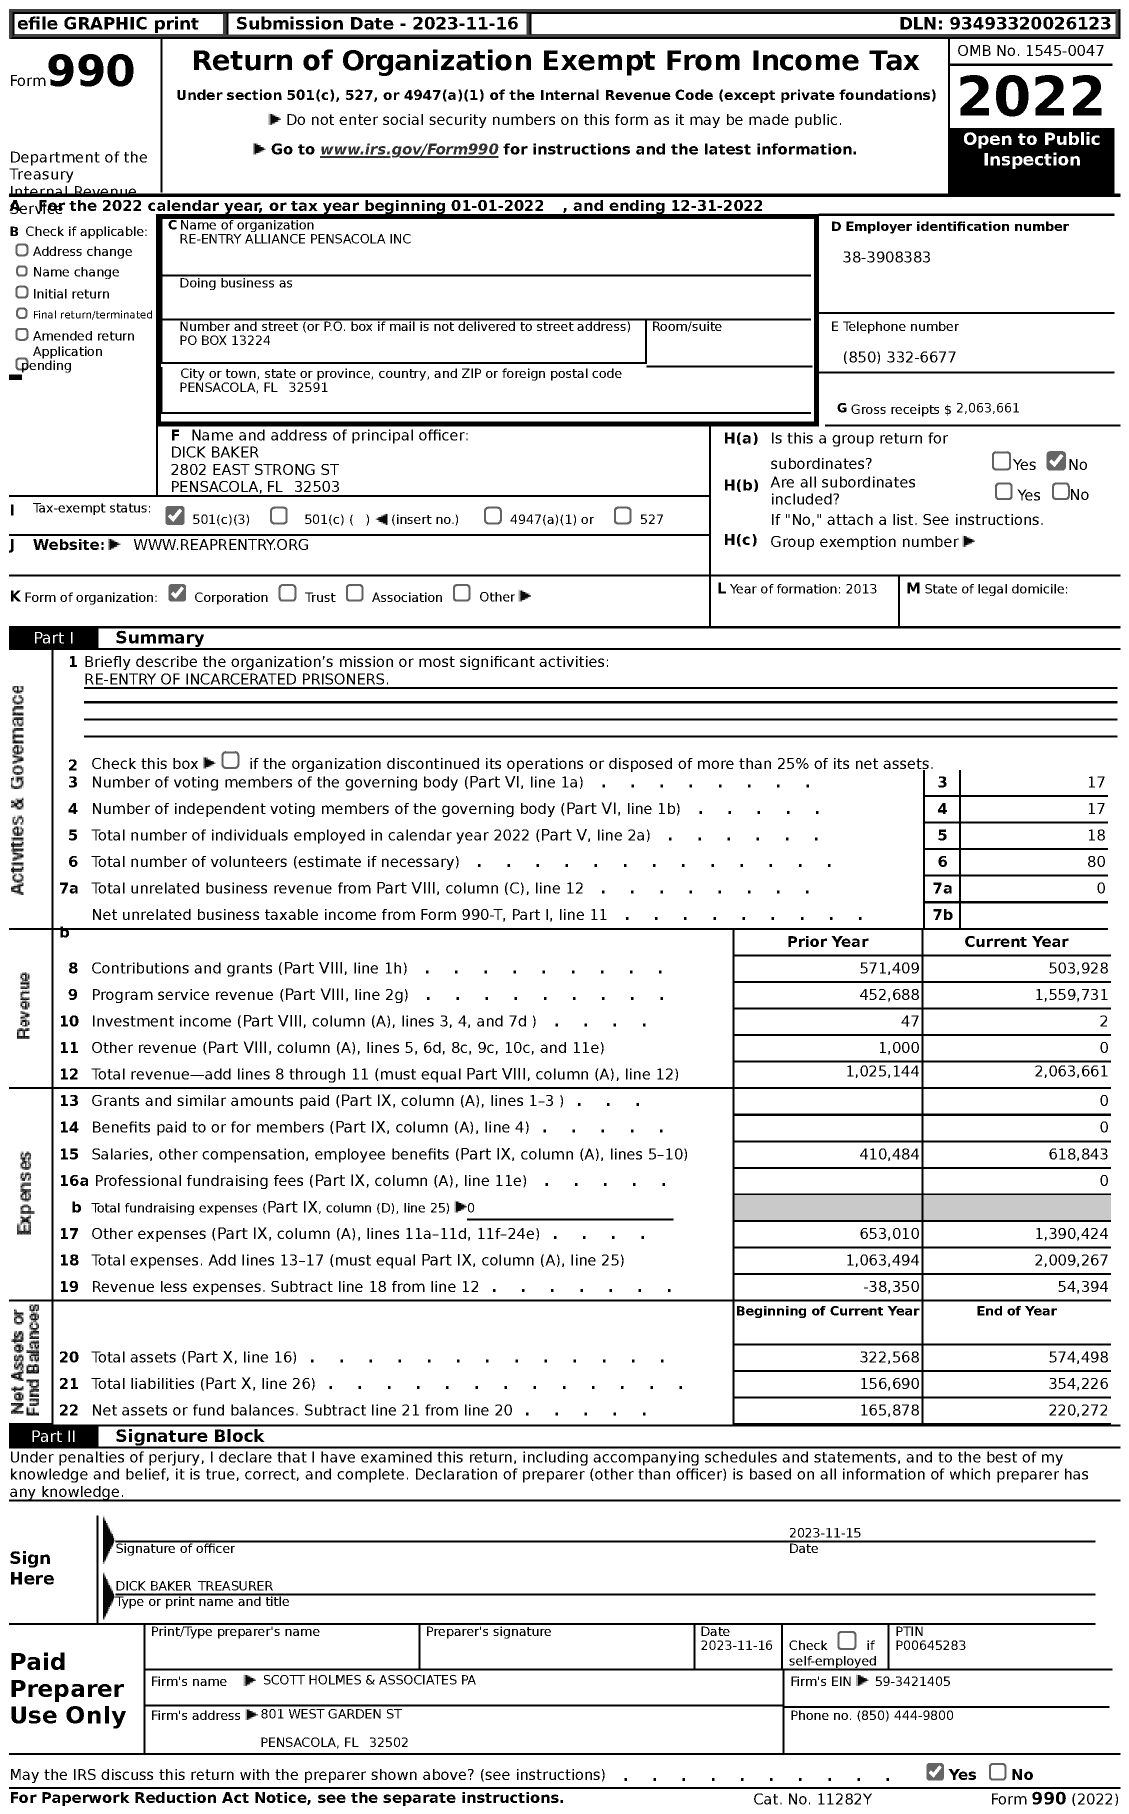 Image of first page of 2022 Form 990 for Re-Entry Alliance Pensacola (REAP)